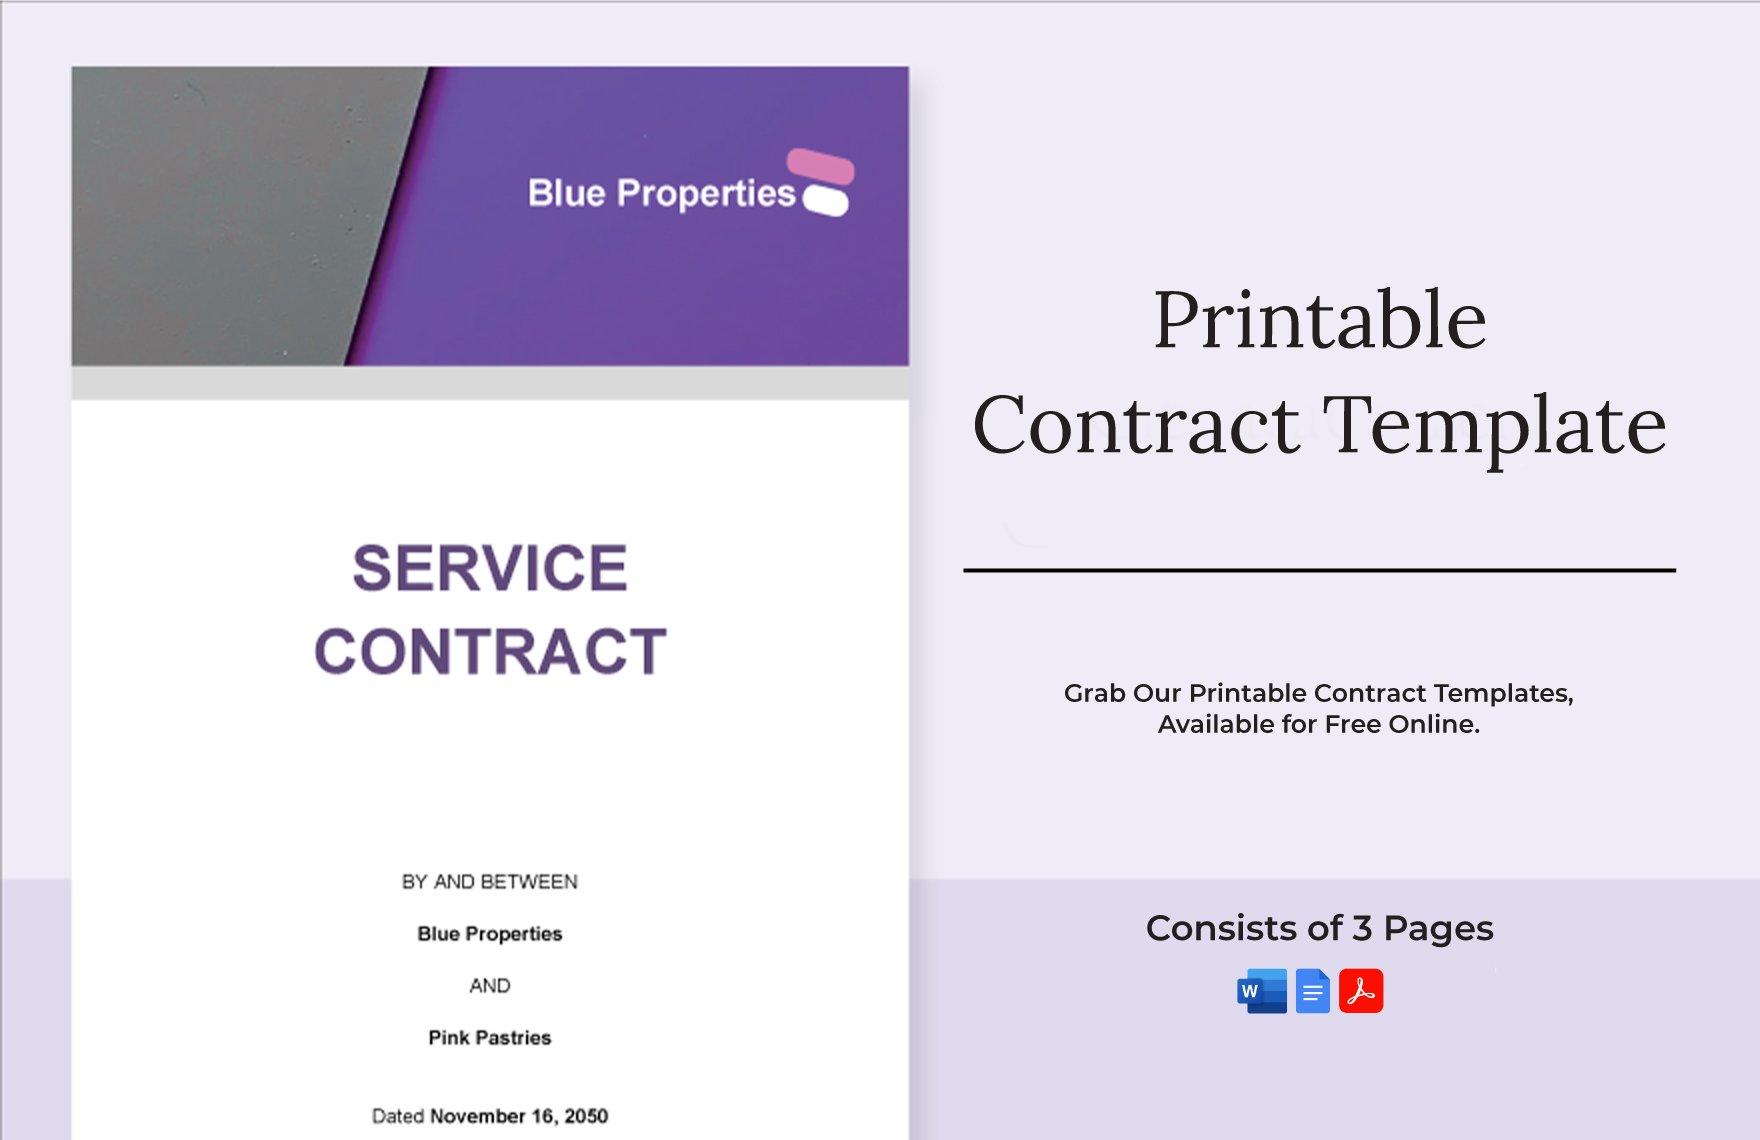 Free Printable Contract Template